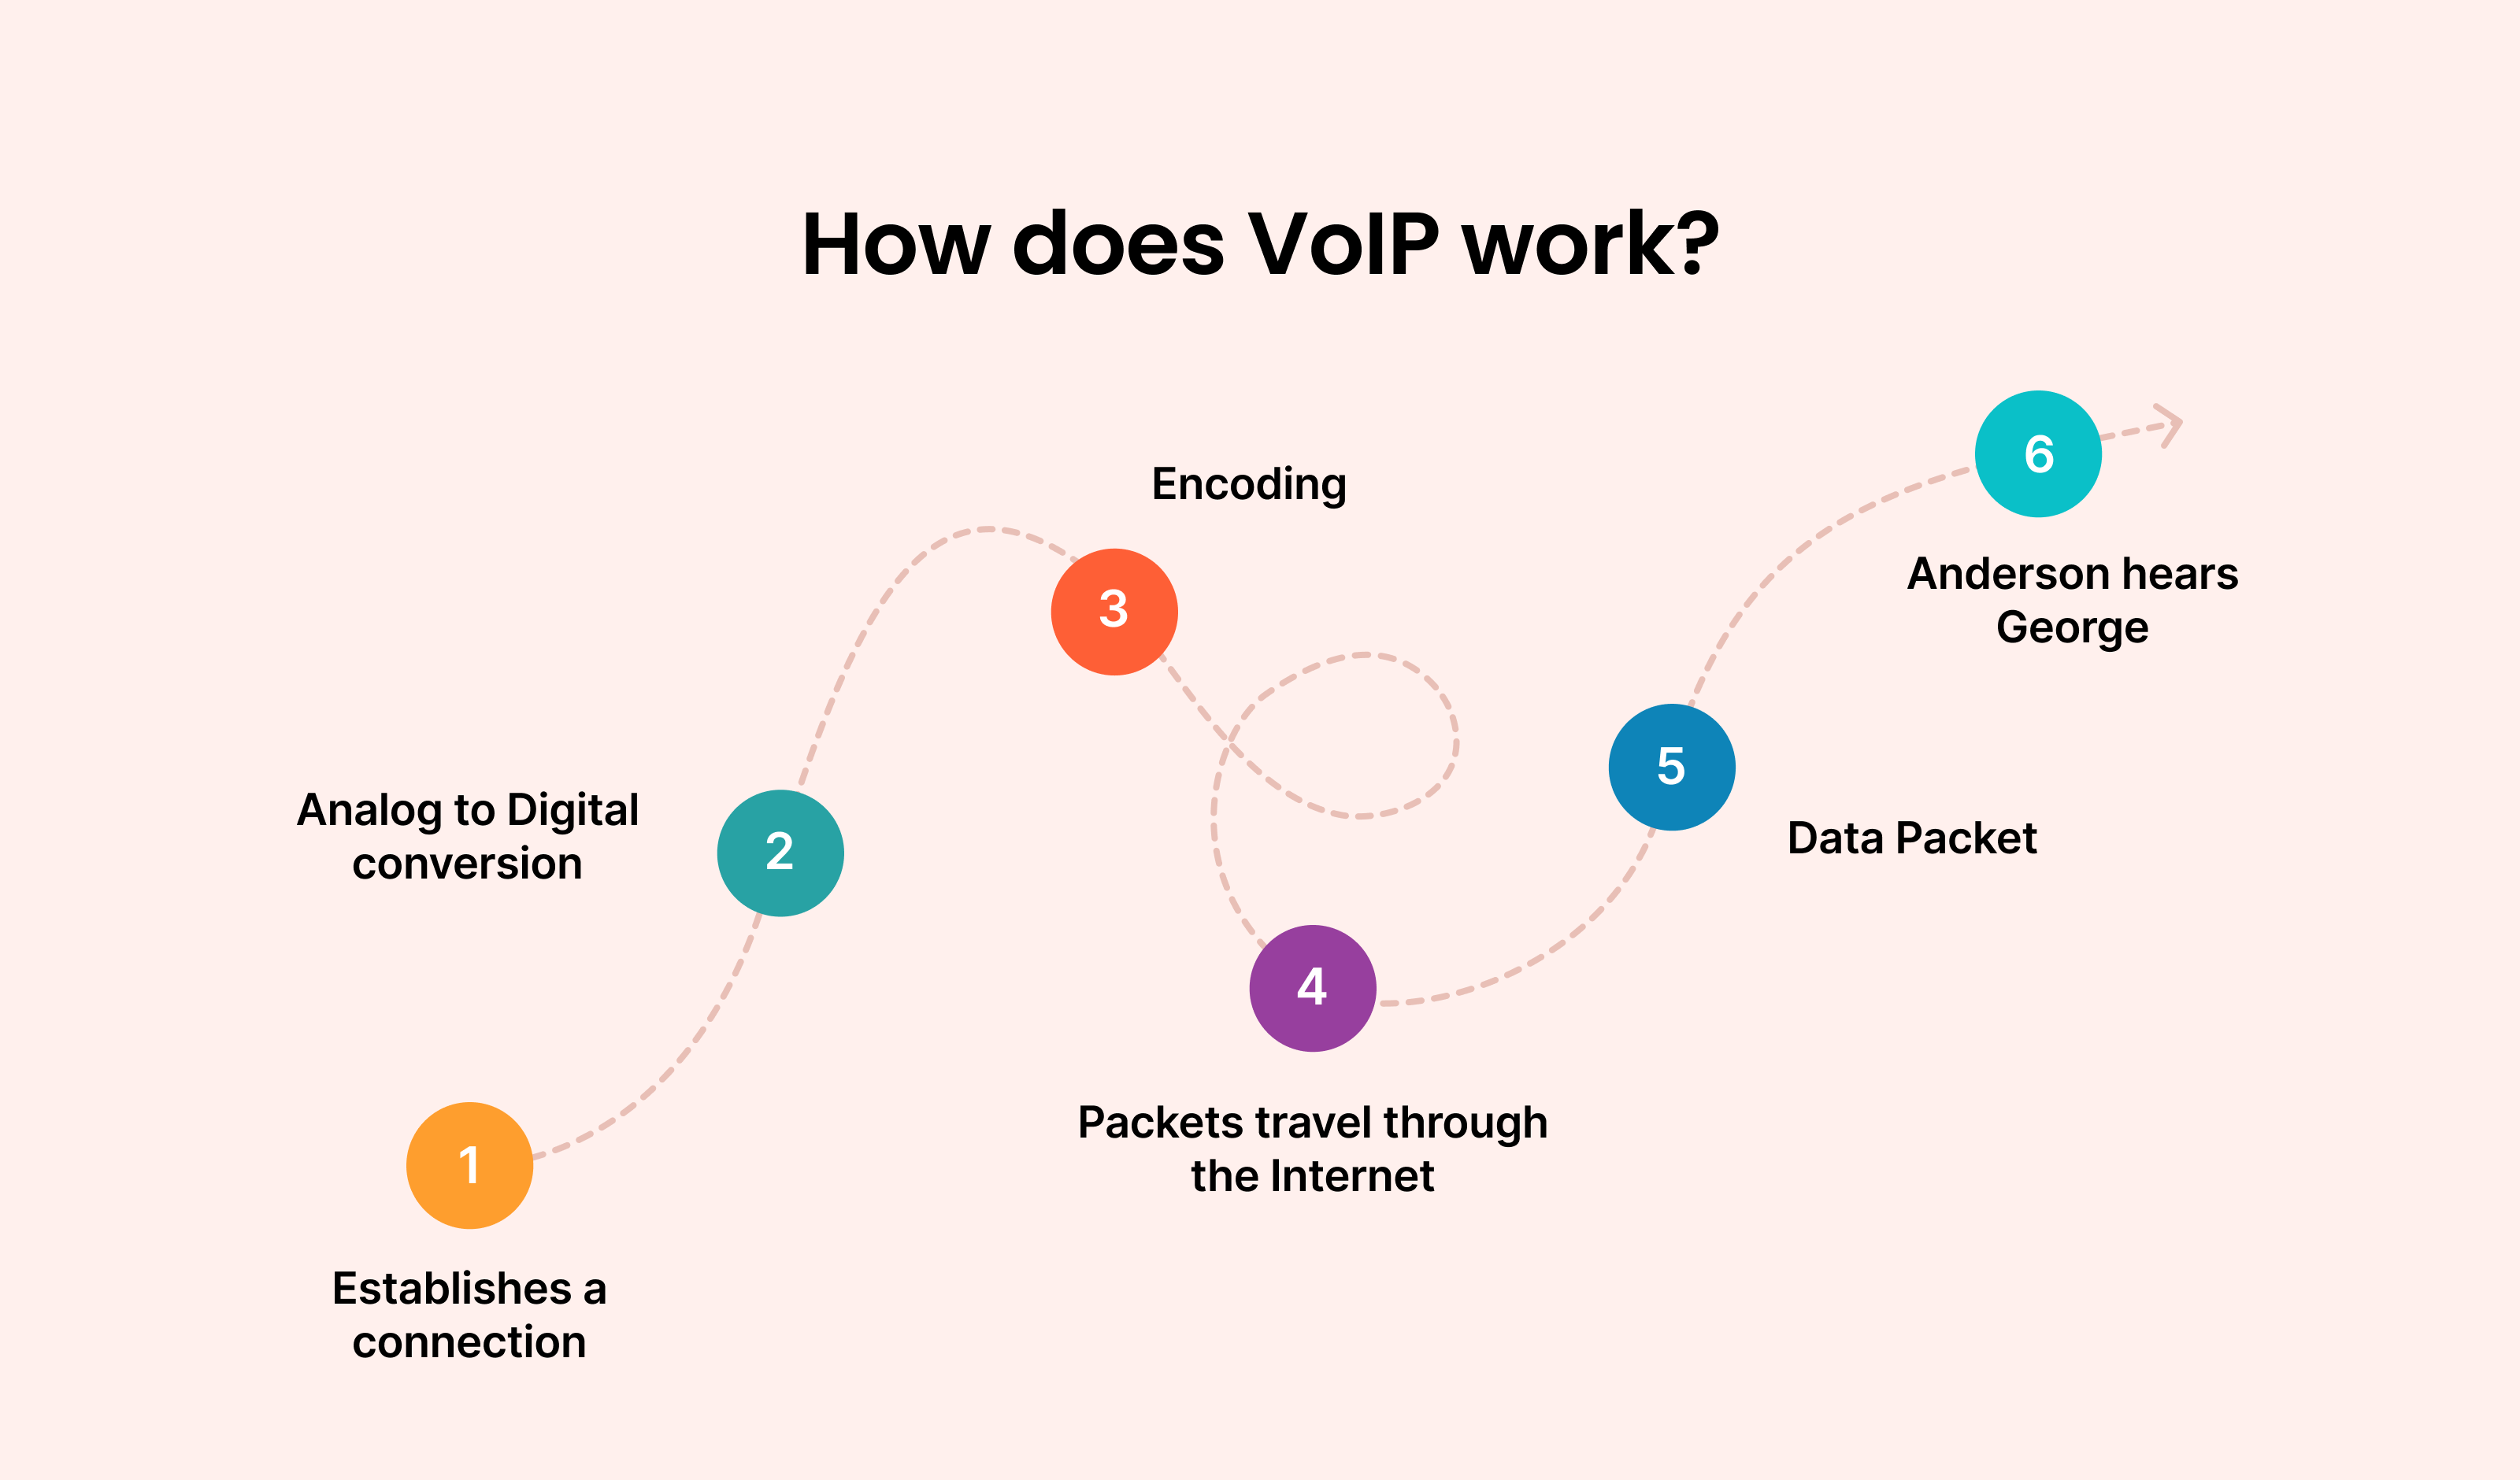 How does VoIP work?